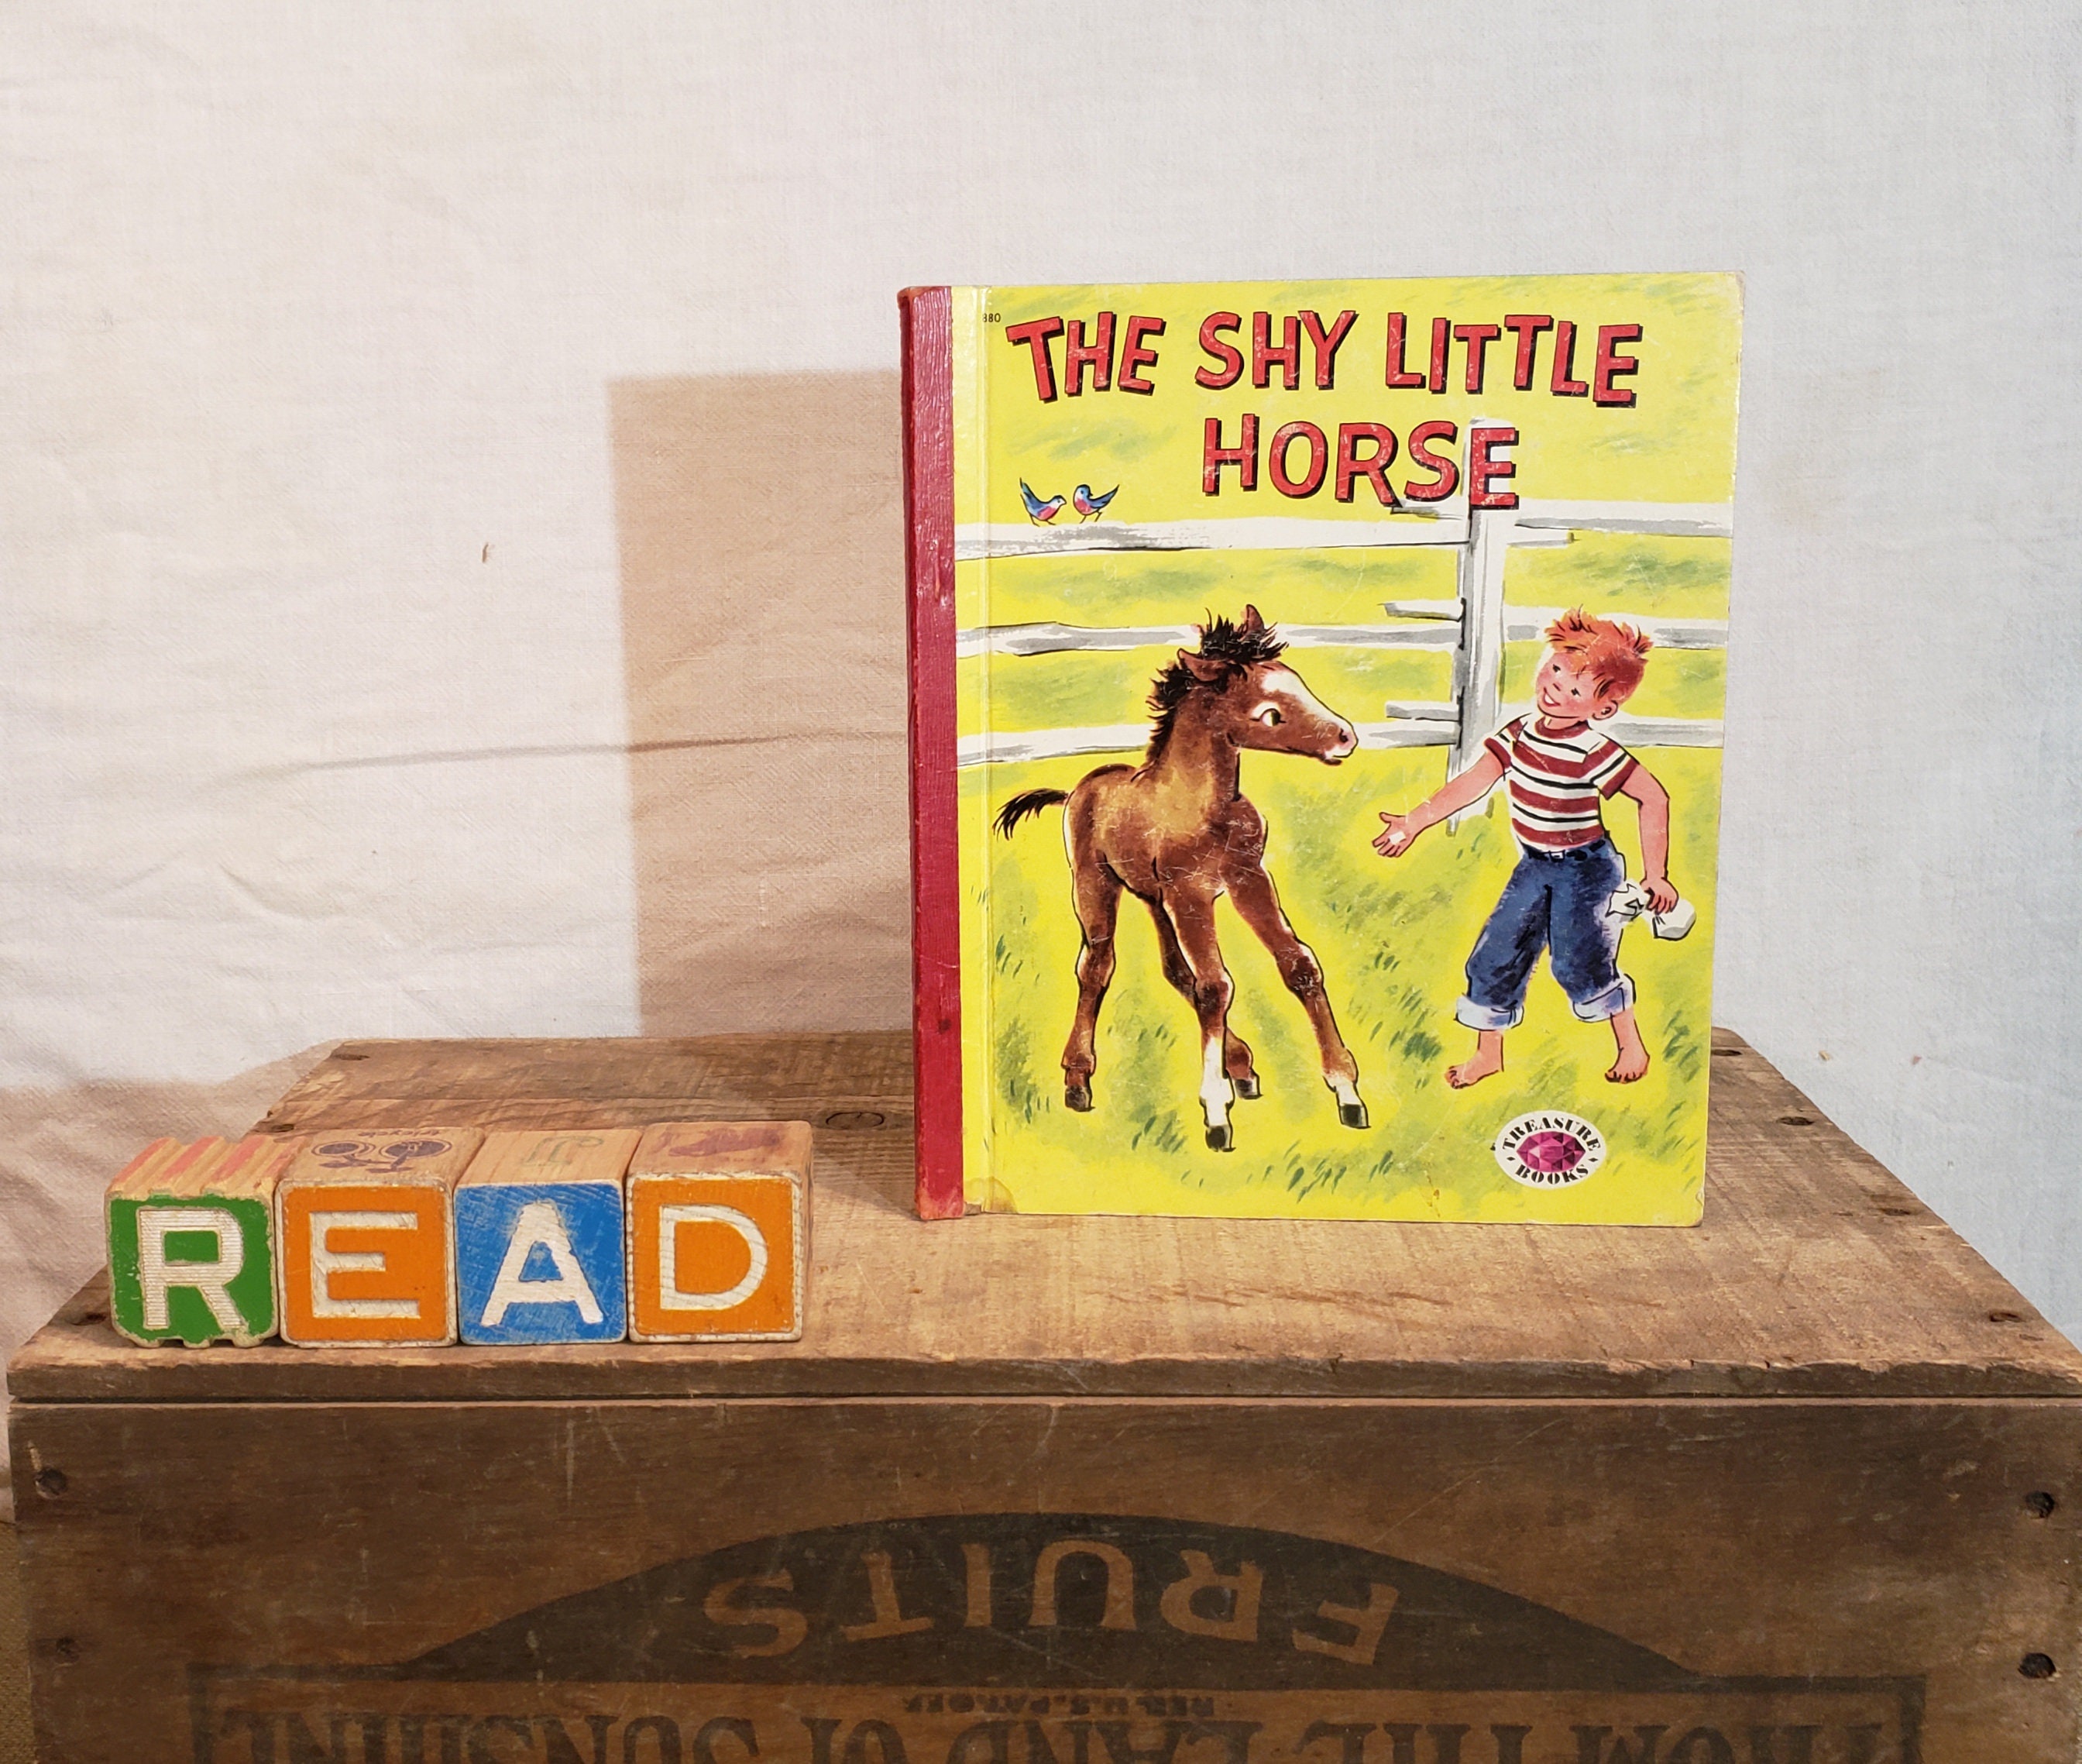 The Shy Little Horse Written by Margaret Wise Brown image